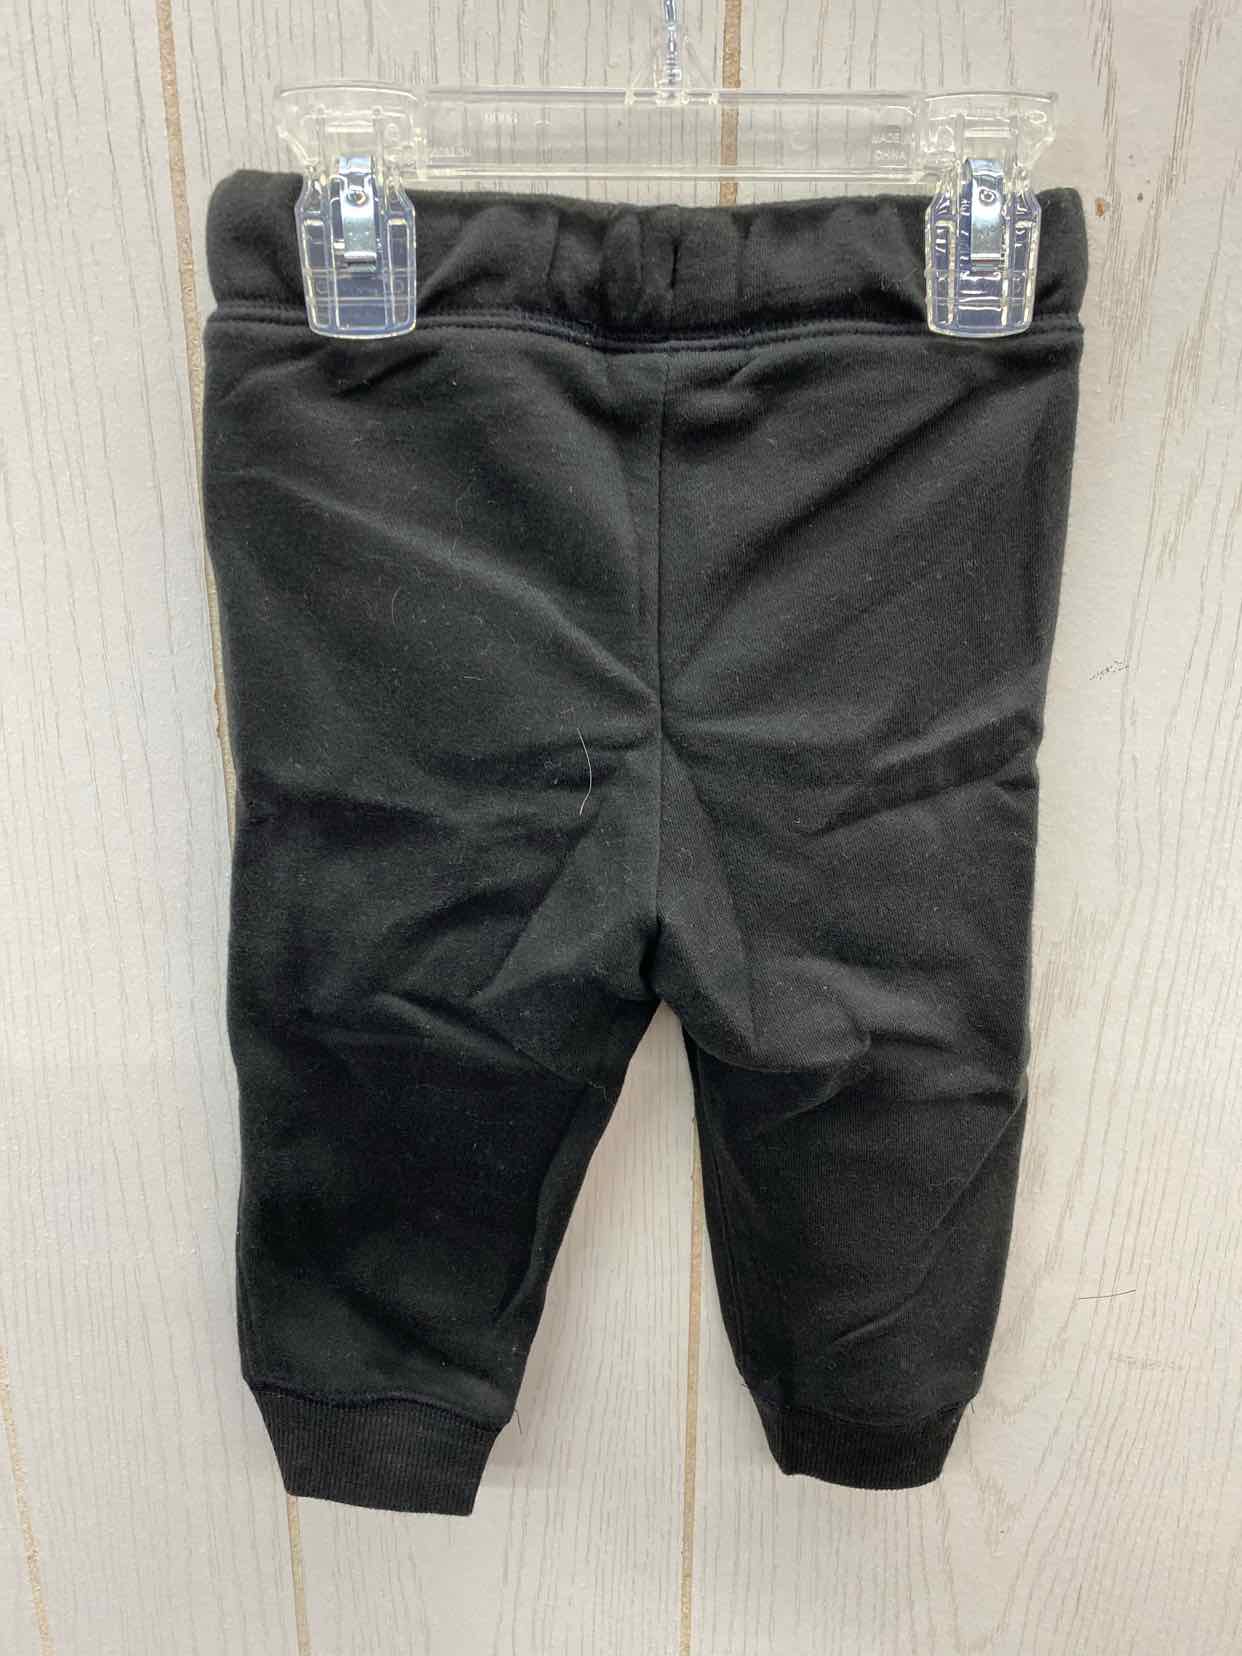 Jumping Beans Infant 18 Months Pants